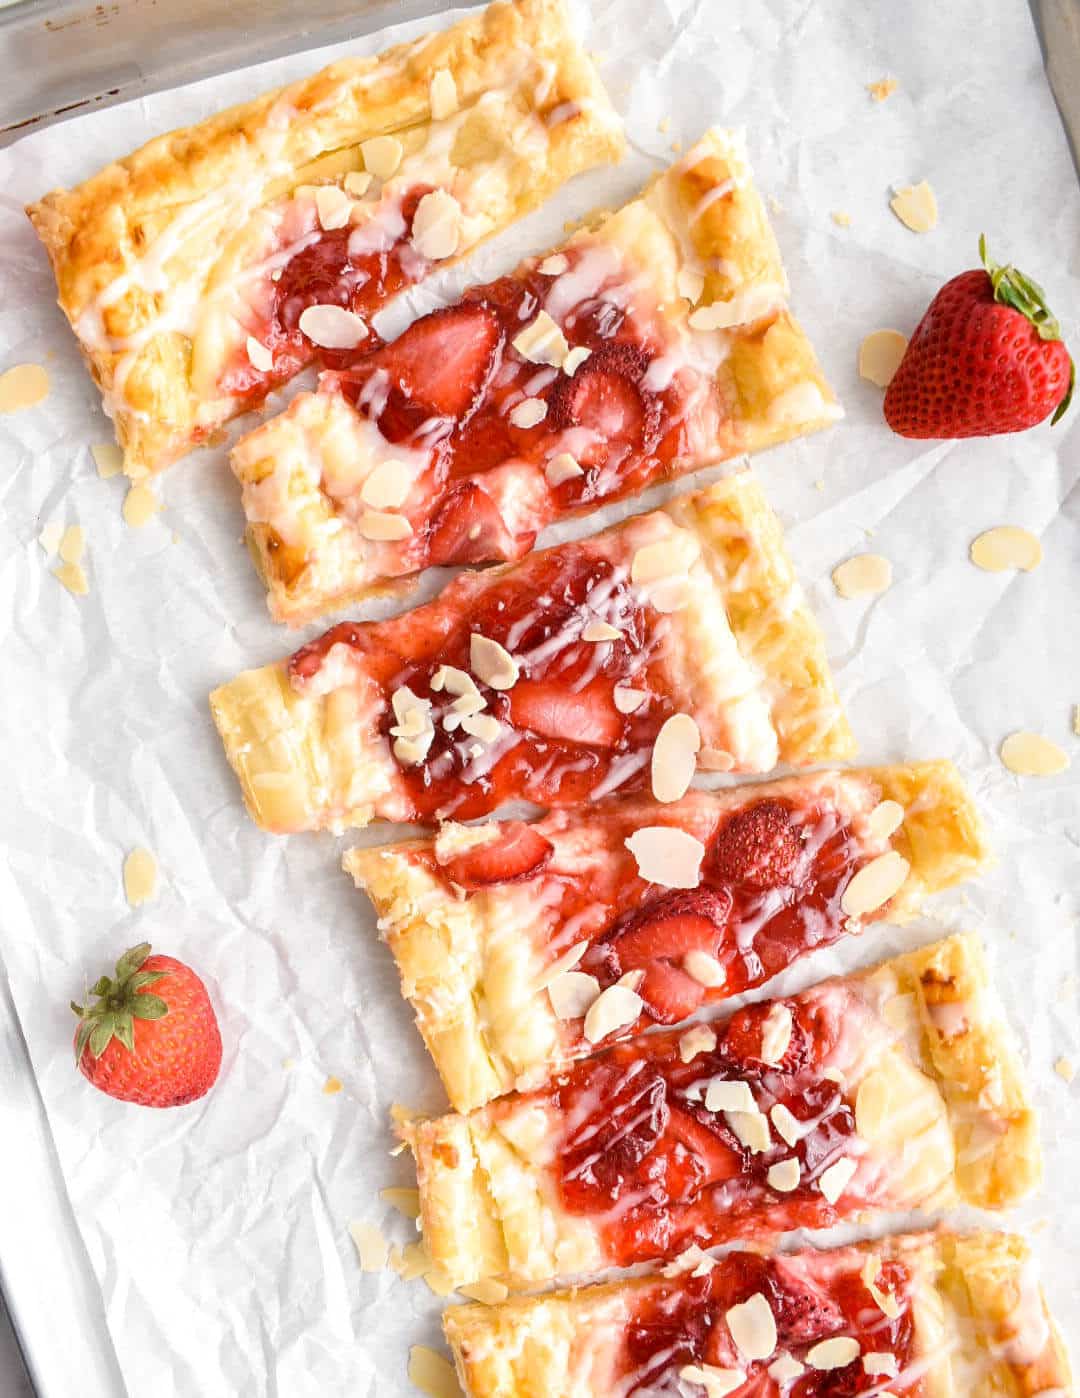 Strawberry cream cheese Danish cut into pieces on crinkled parchment paper.